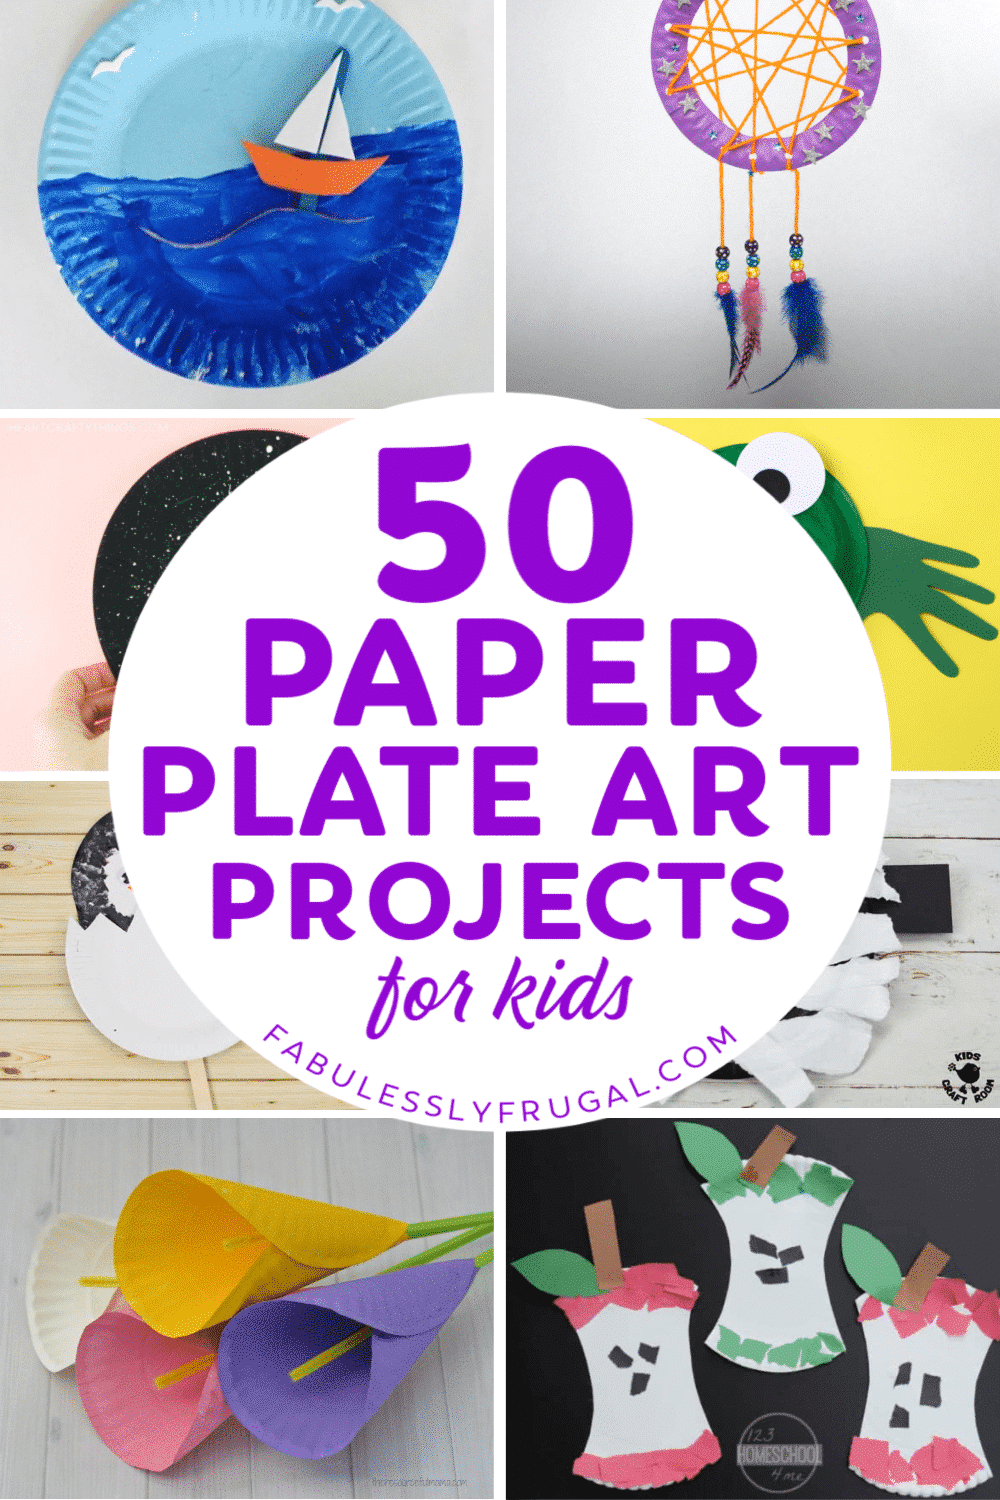 Paper plate art projects